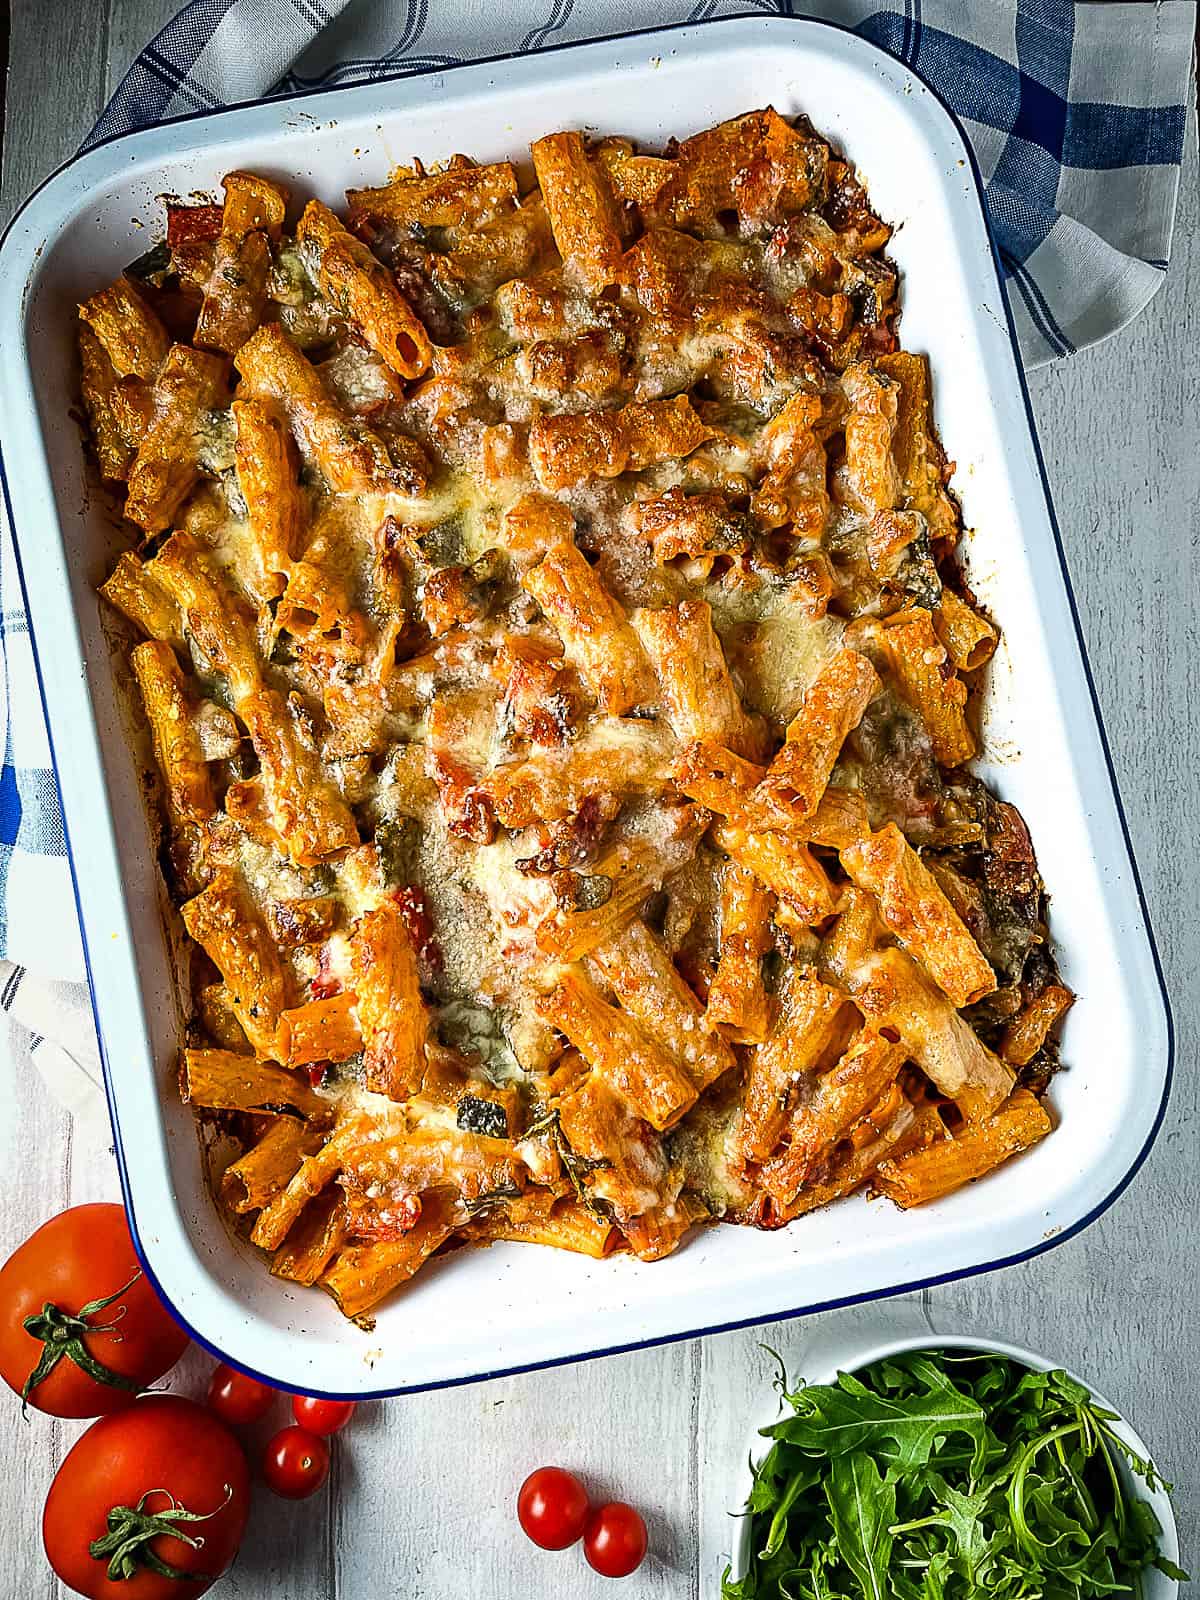 vegetable and pesto pasta bake in dish ready to serve